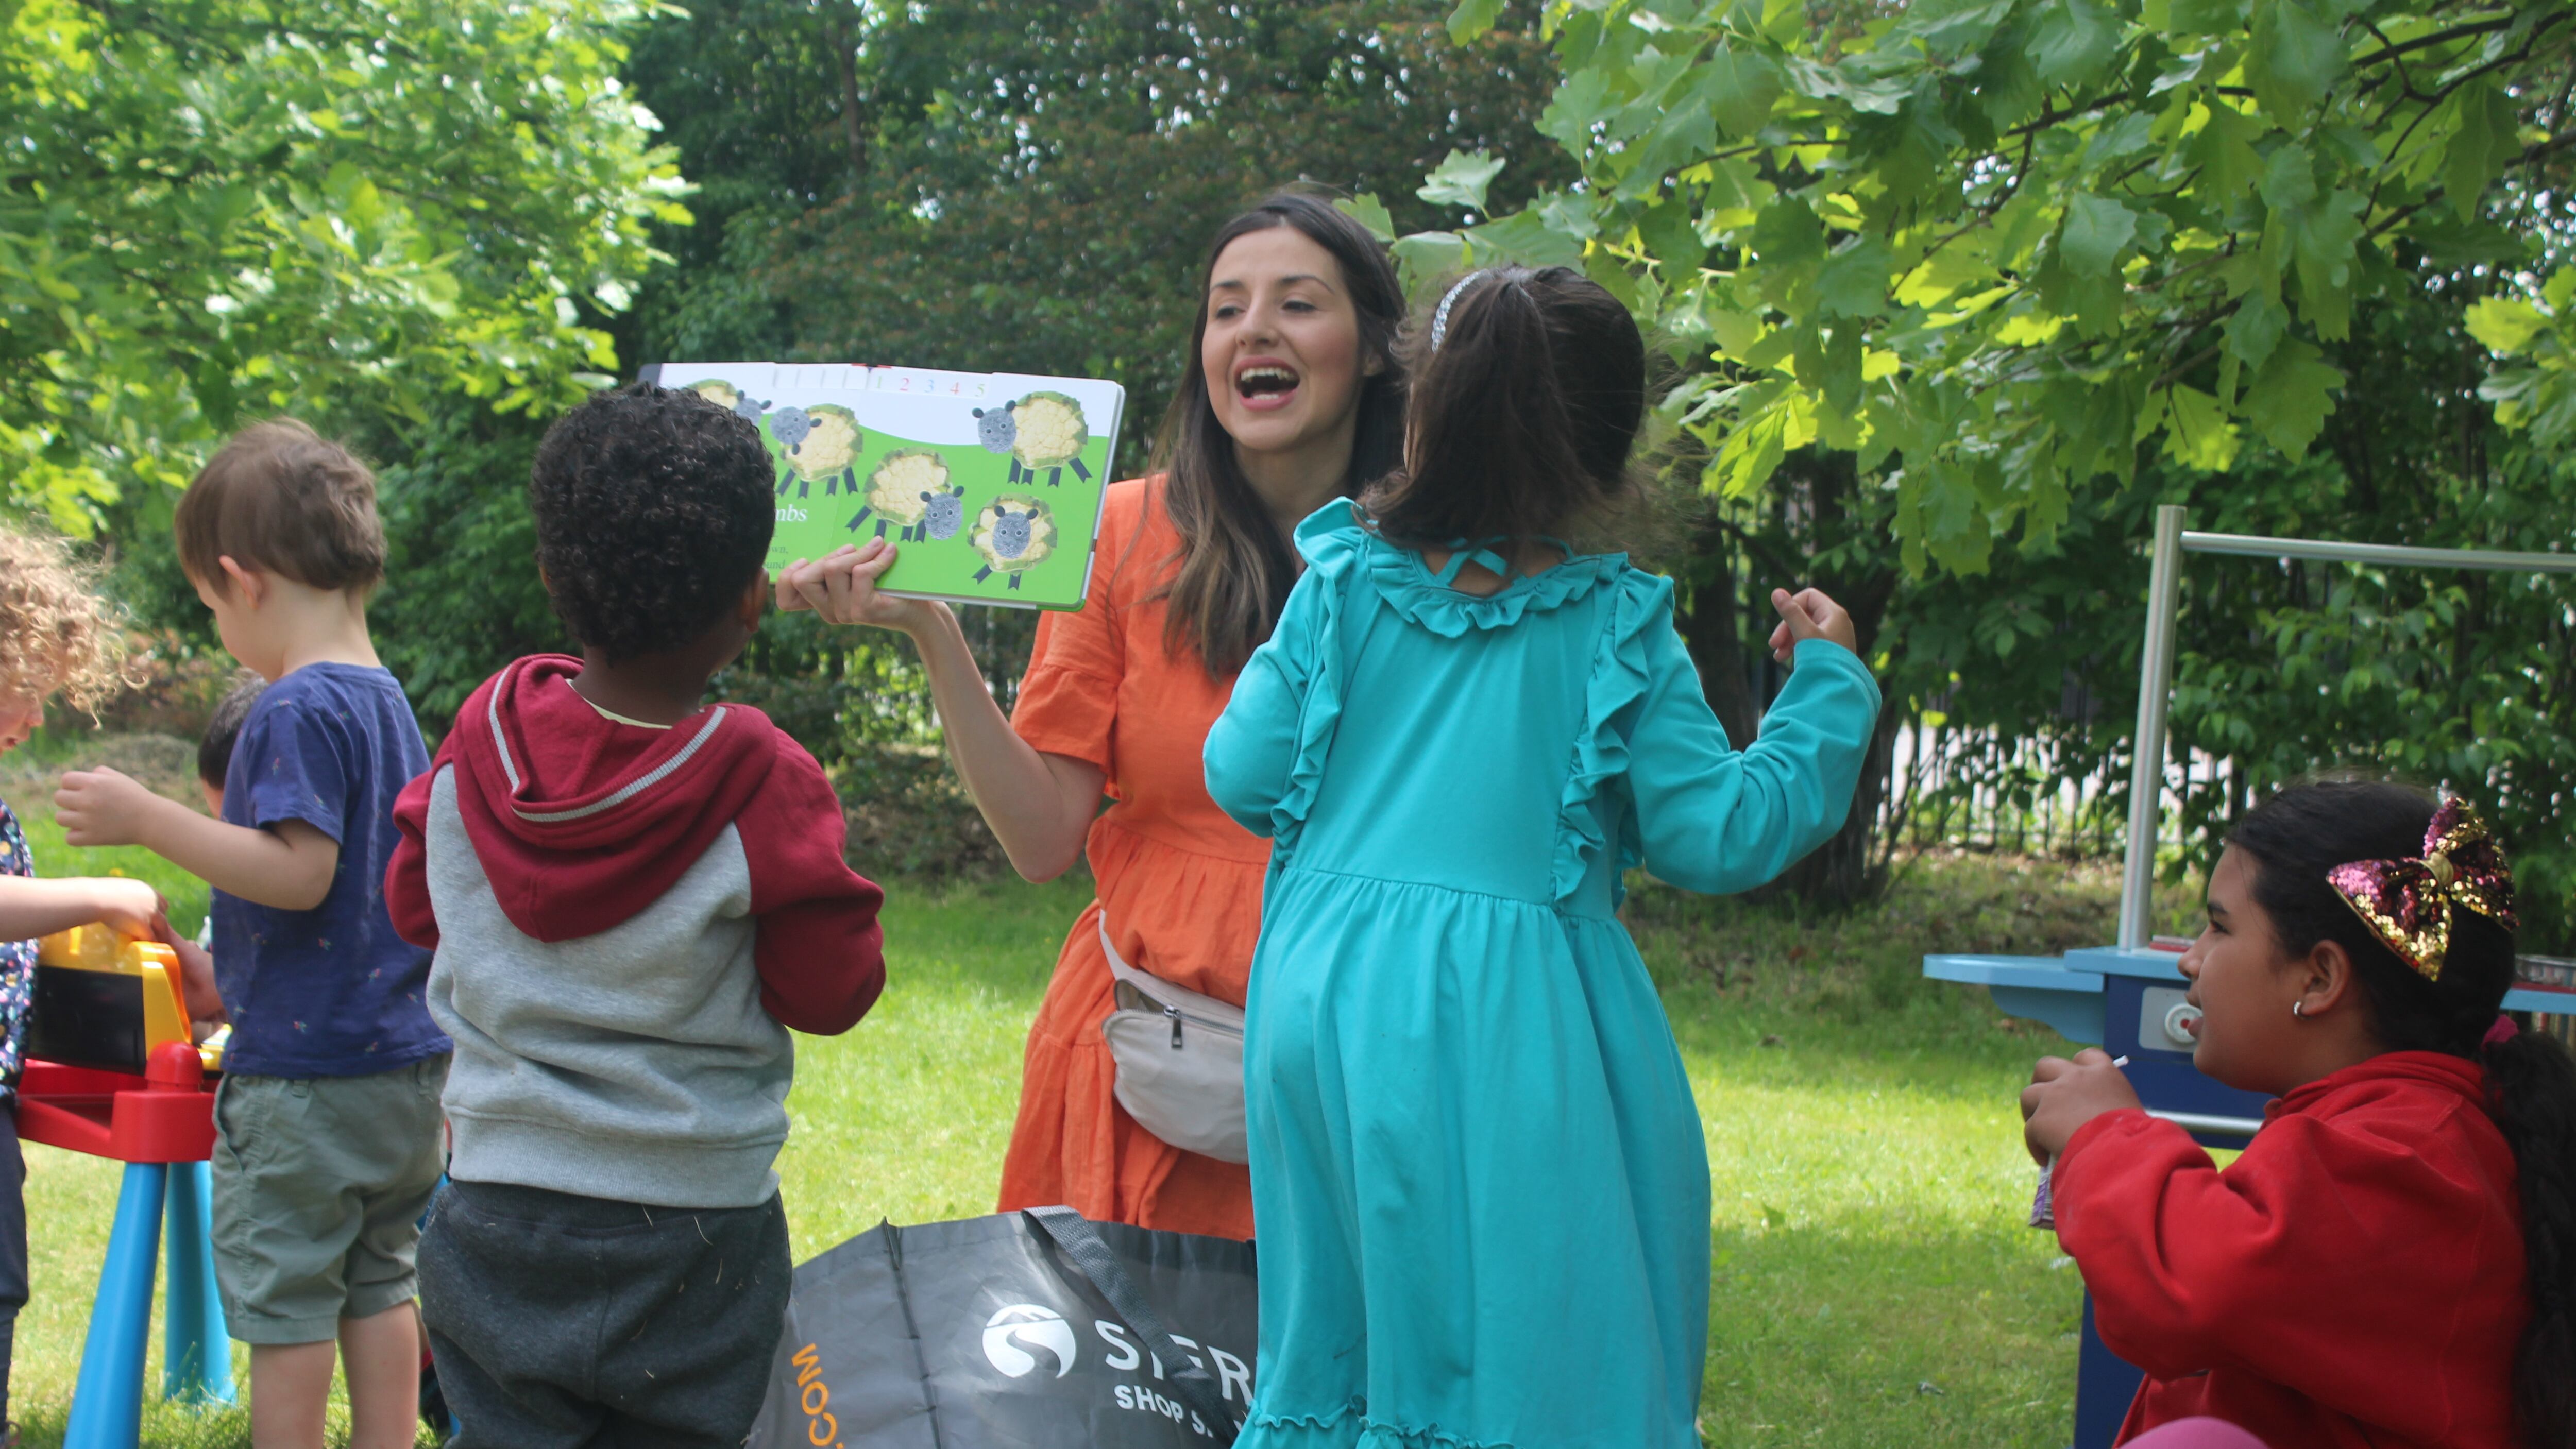 A woman with brown hair and a red dress laughs with four children of different ages while standing on grass in front of trees in a park.